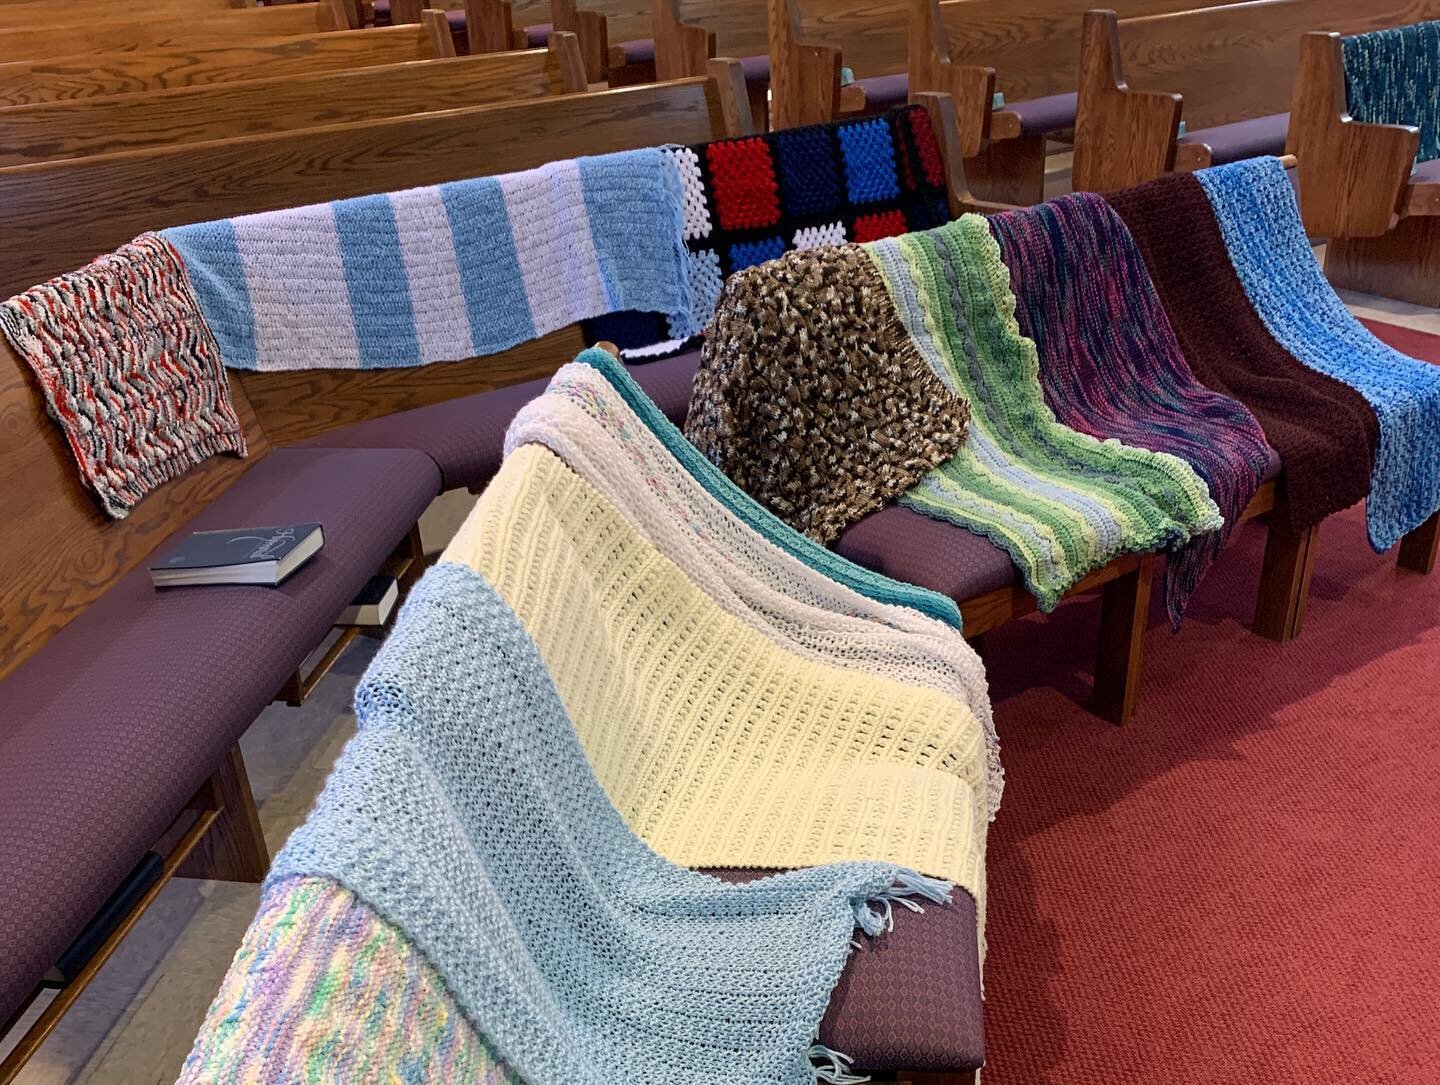 This morning we blessed blankets to comfort the struggling and got together for a meaningful council meeting following a restorative worship service. It is good to be together as BCOB! Come and see!